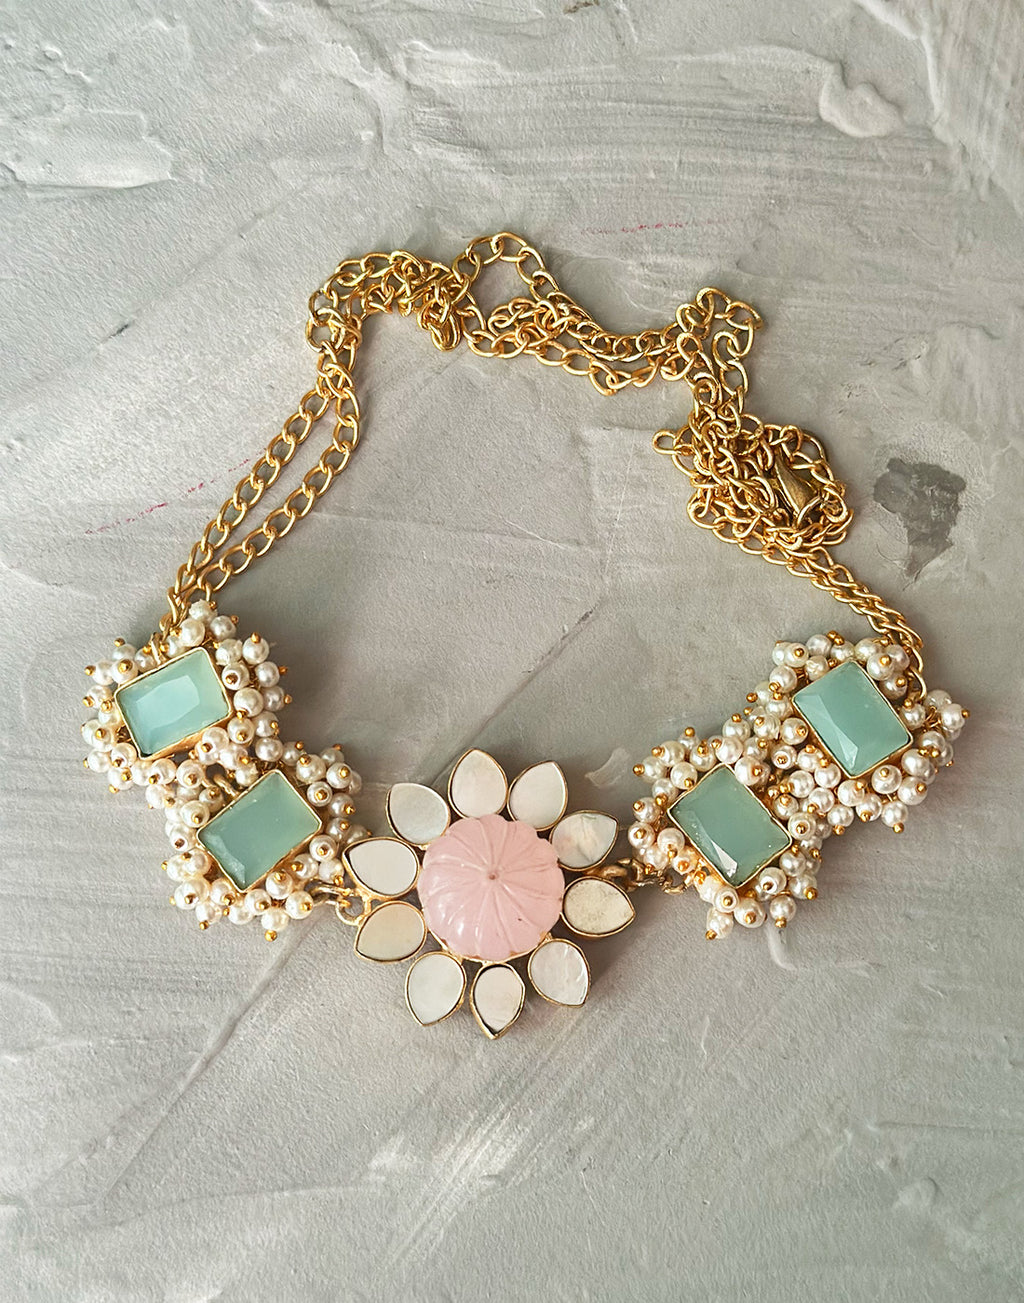 Pink Flower & Monalisa Choker - Statement Necklaces - Gold-Plated & Hypoallergenic Jewellery - Made in India - Dubai Jewellery - Dori